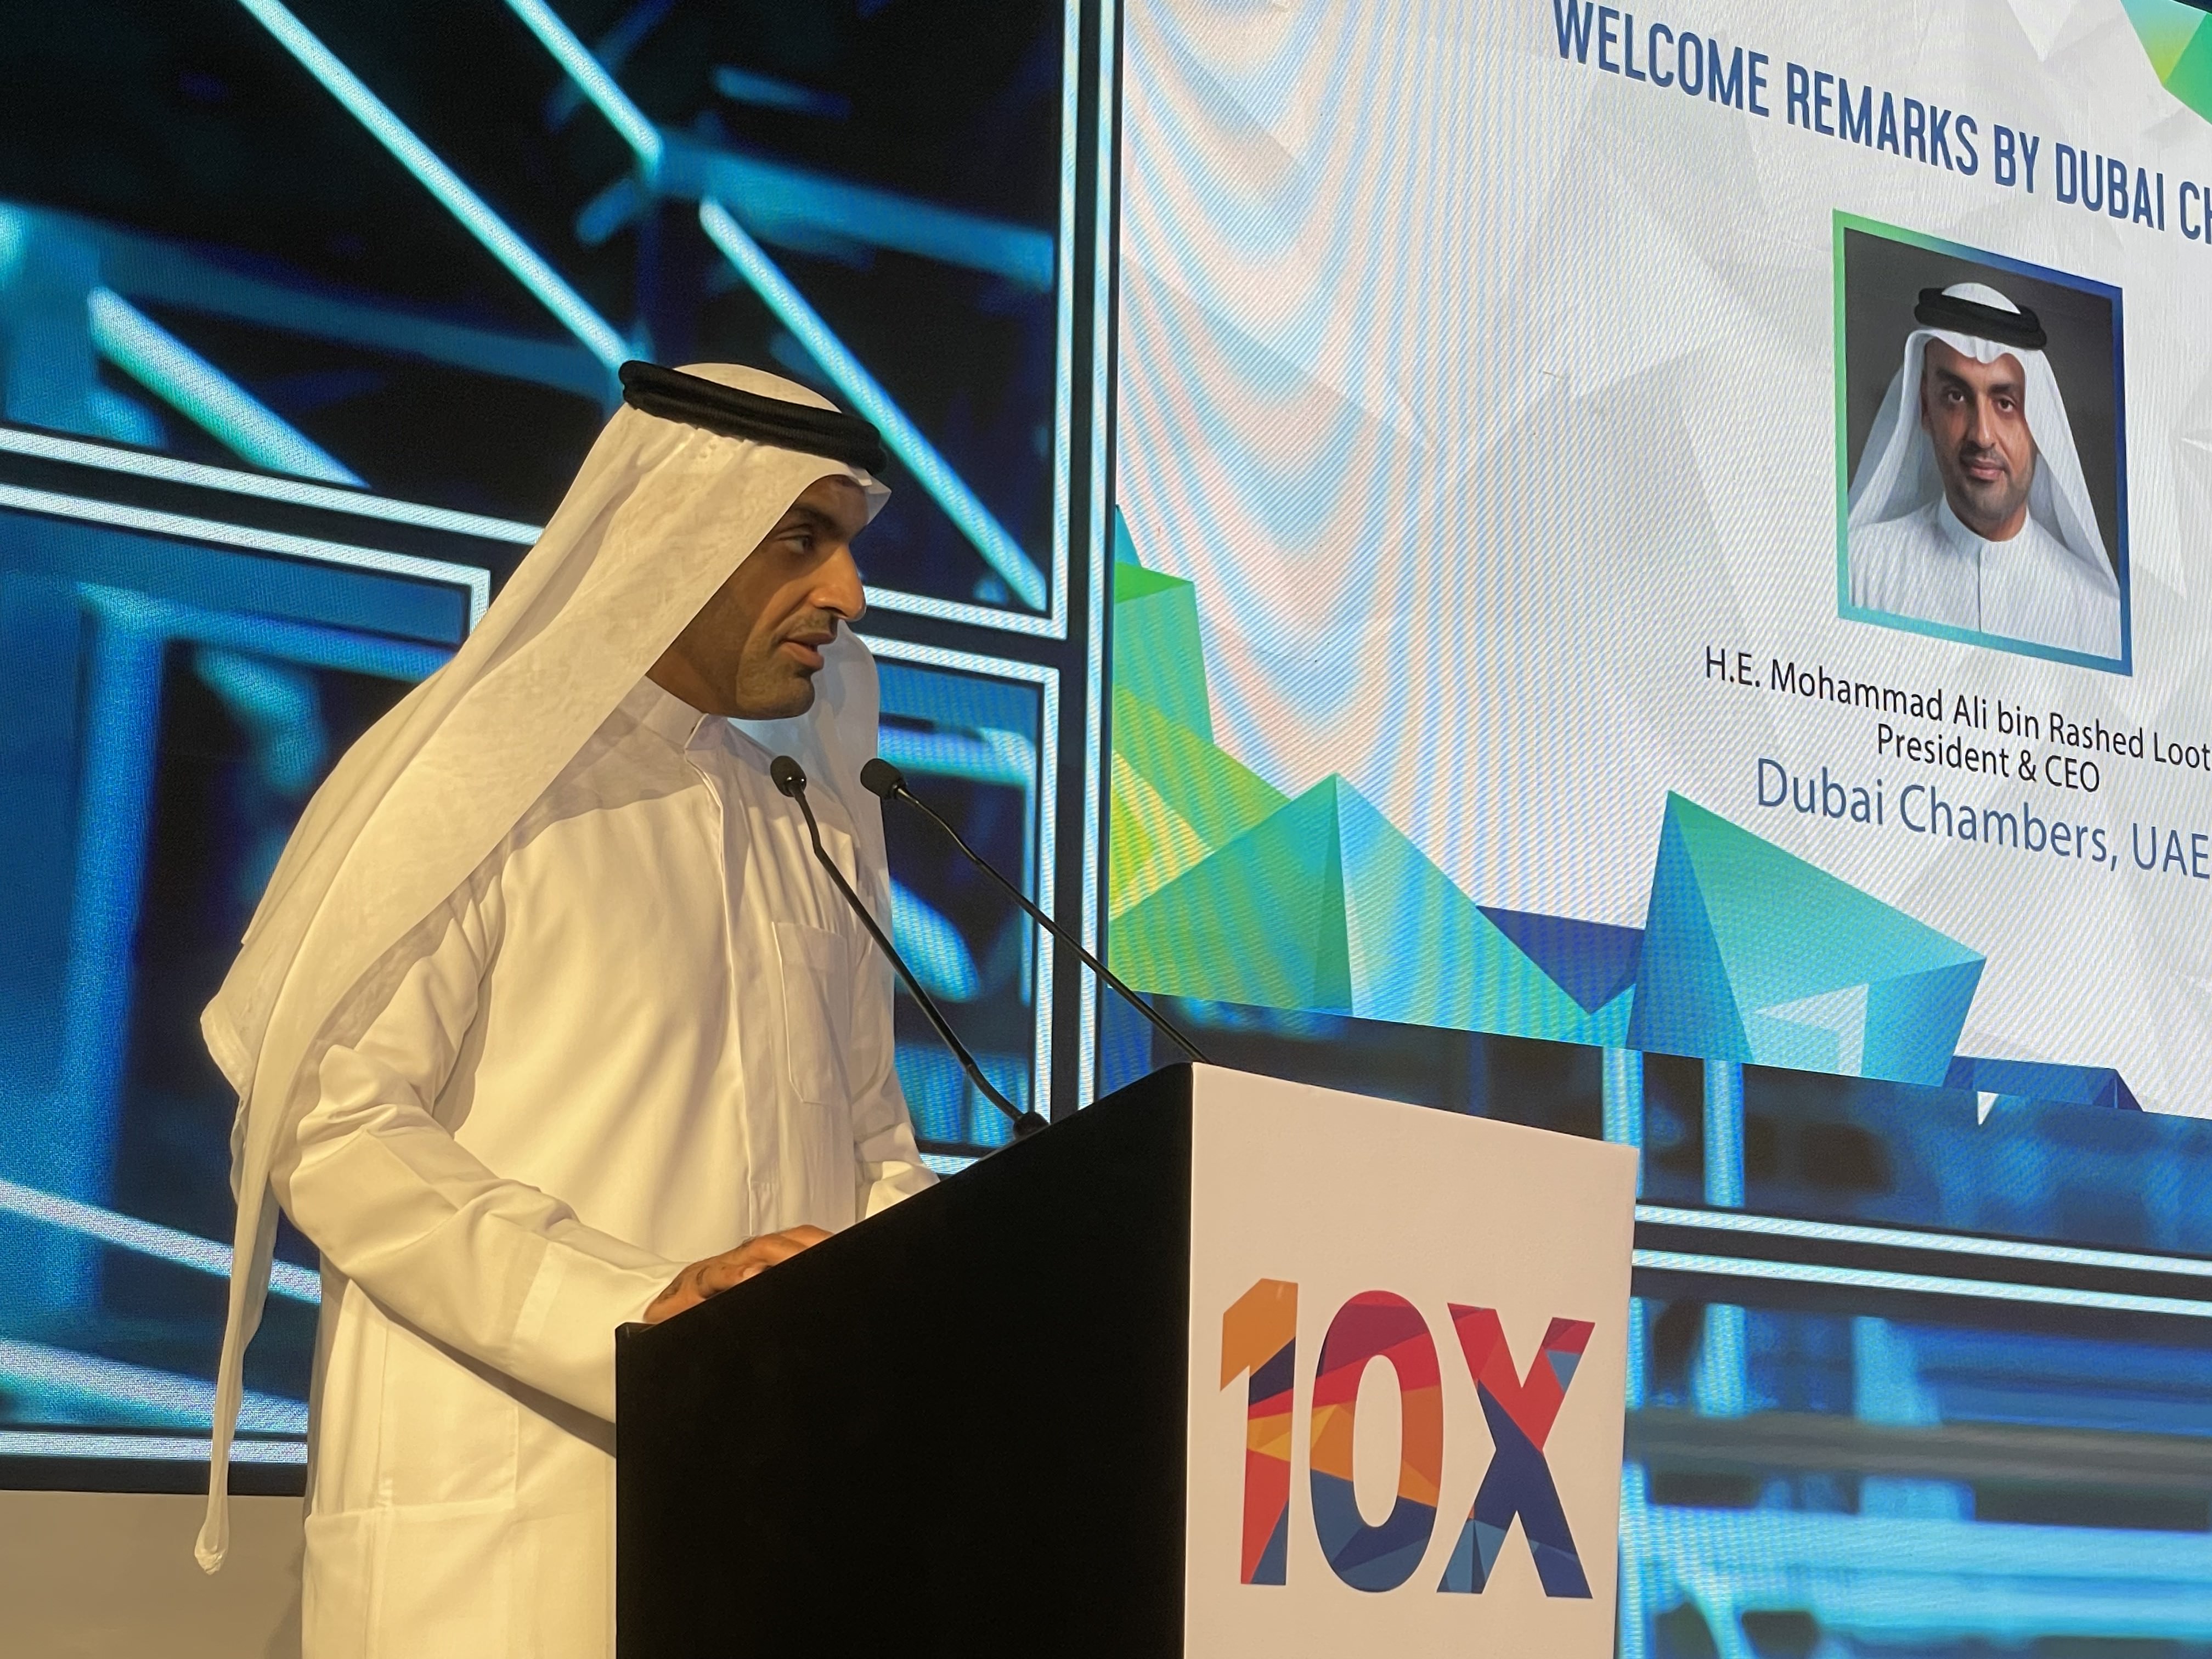 Mohammad Ali Rashed Lootah, President and CEO of Dubai Chambers. Photo: Du Nhat Dang / Tuoi Tre News